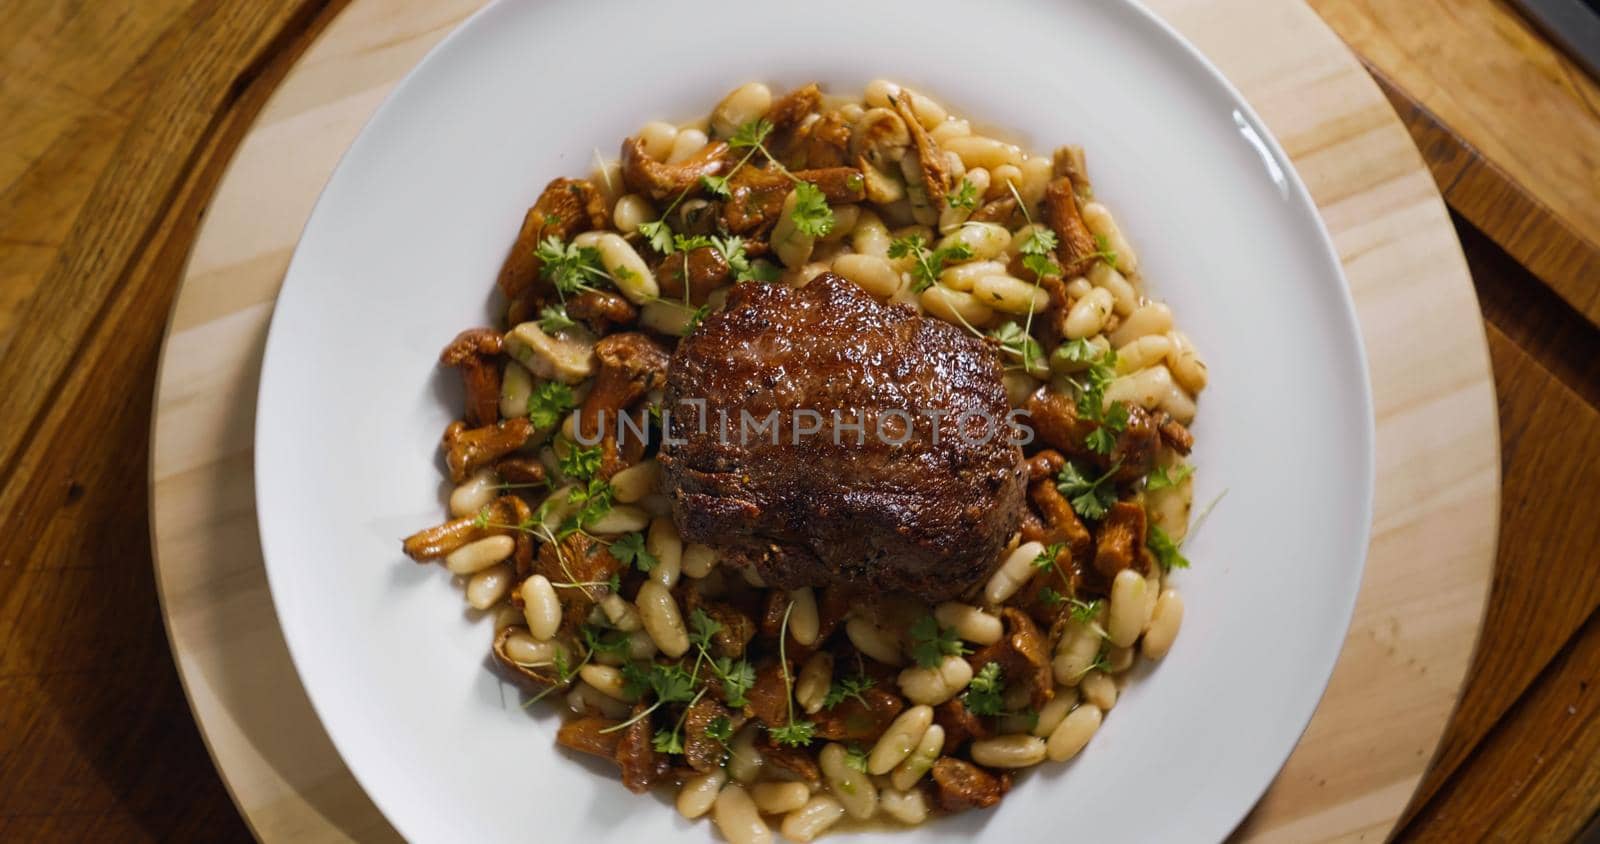 Top View of Food. White Plate with delicious Beef Food dish. Food Preparation by RecCameraStock